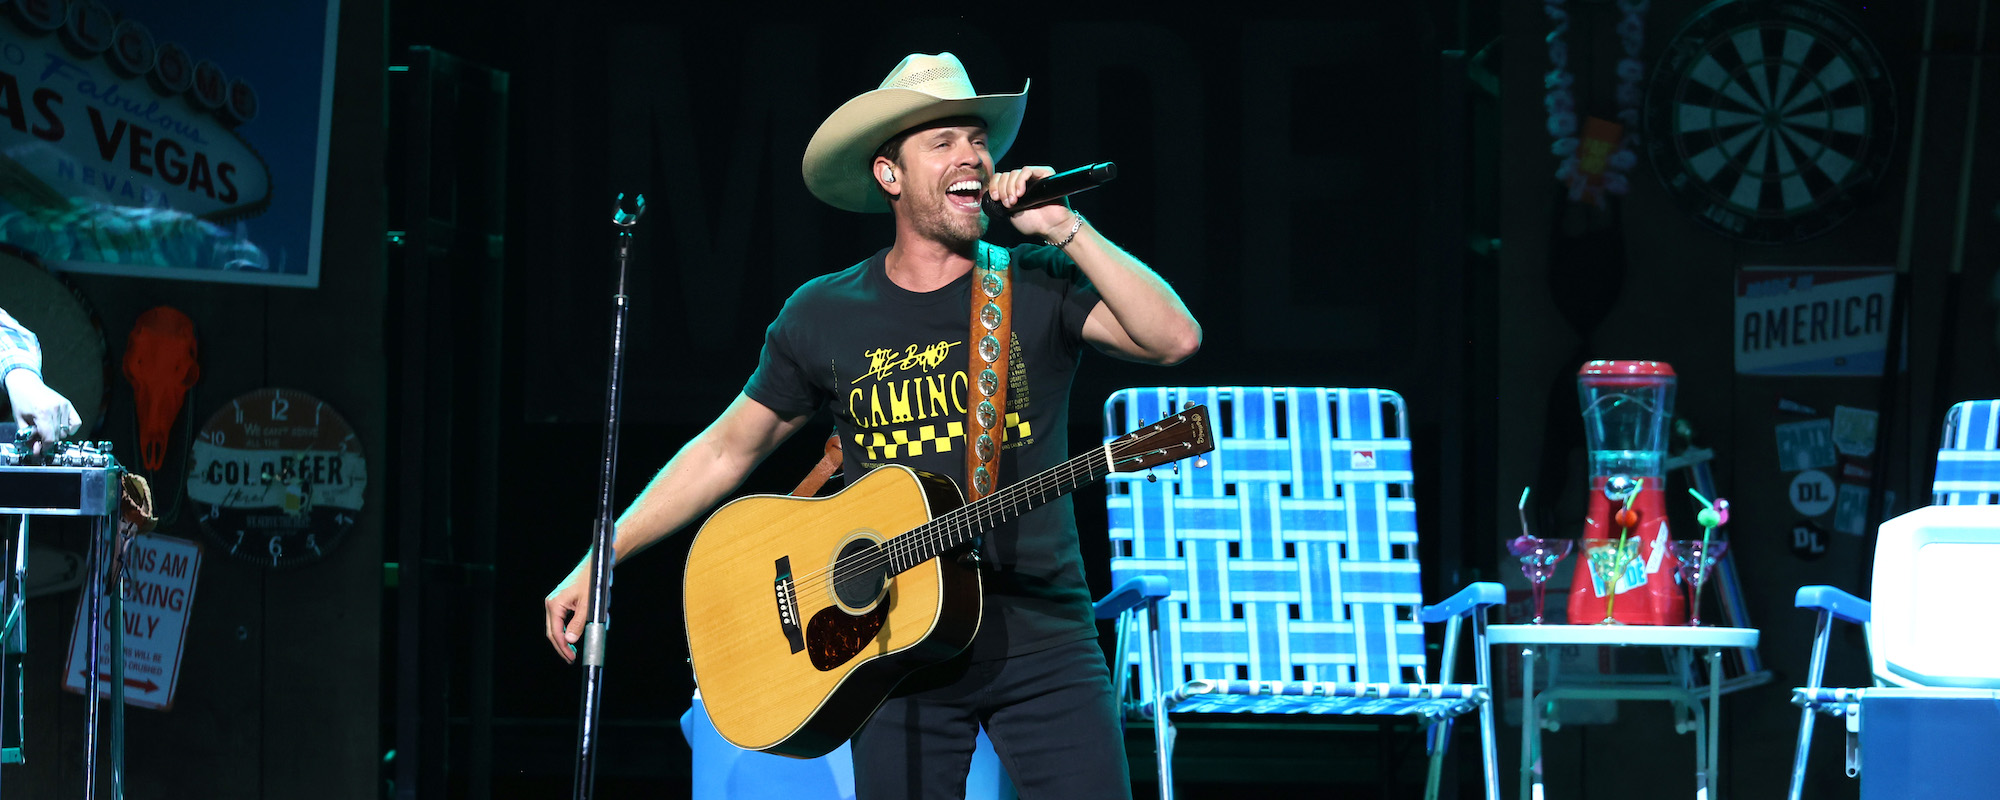 Exclusive: Dustin Lynch on What Inspired His ‘Killed The Cowboy’ Track “Honky Tonk Heartbreaker”